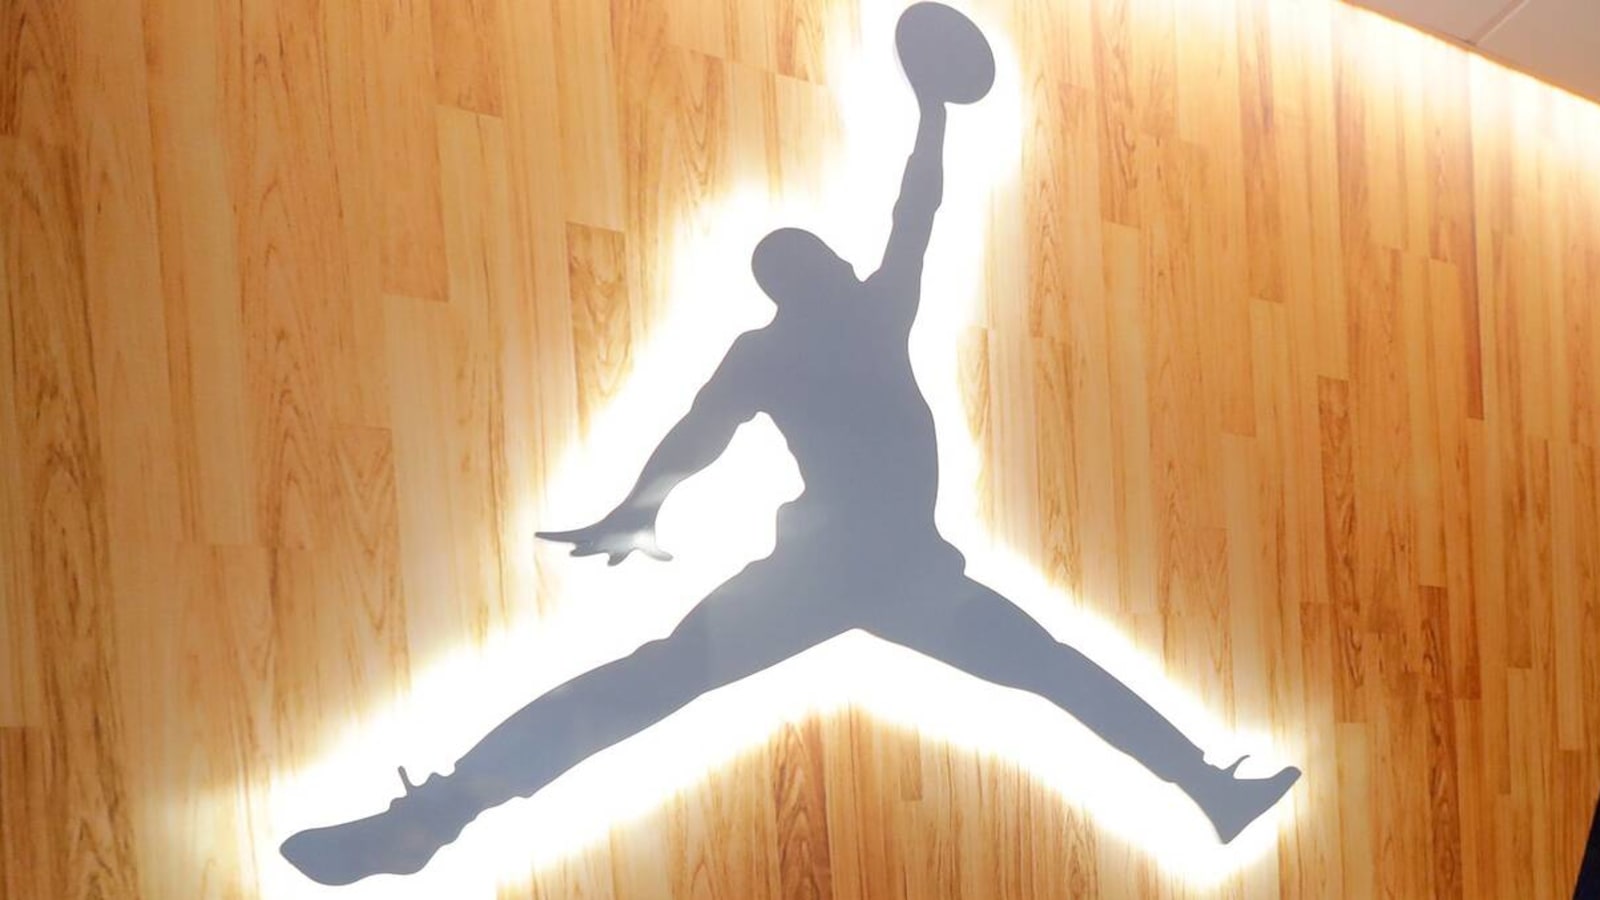 Howard University partners with Jordan Brand on 20-year pact